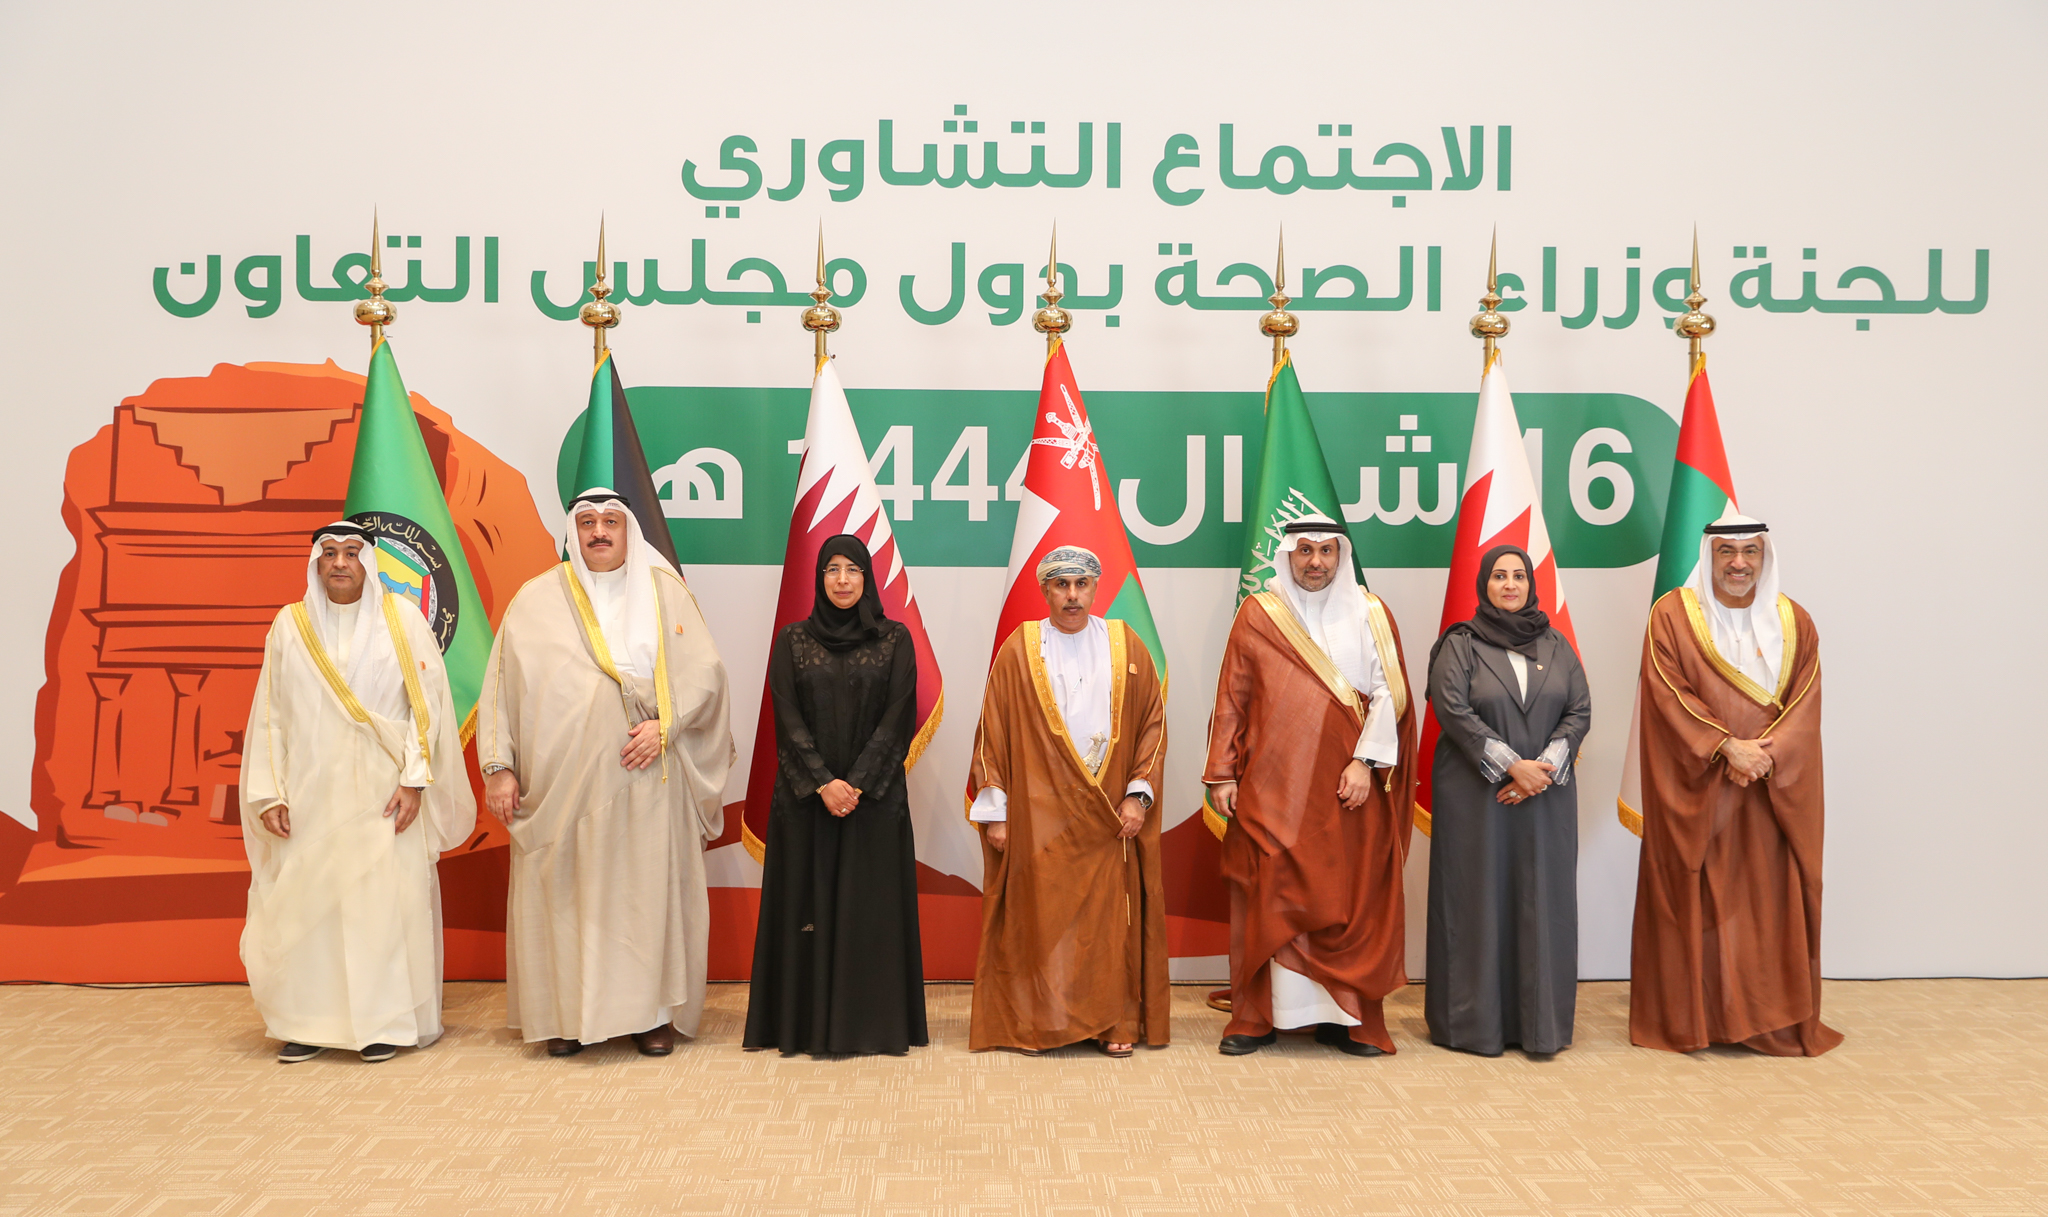 The Consultative Meeting of Health Ministers of GCC Countries was Held in Al-Ula to promote Health Cooperation